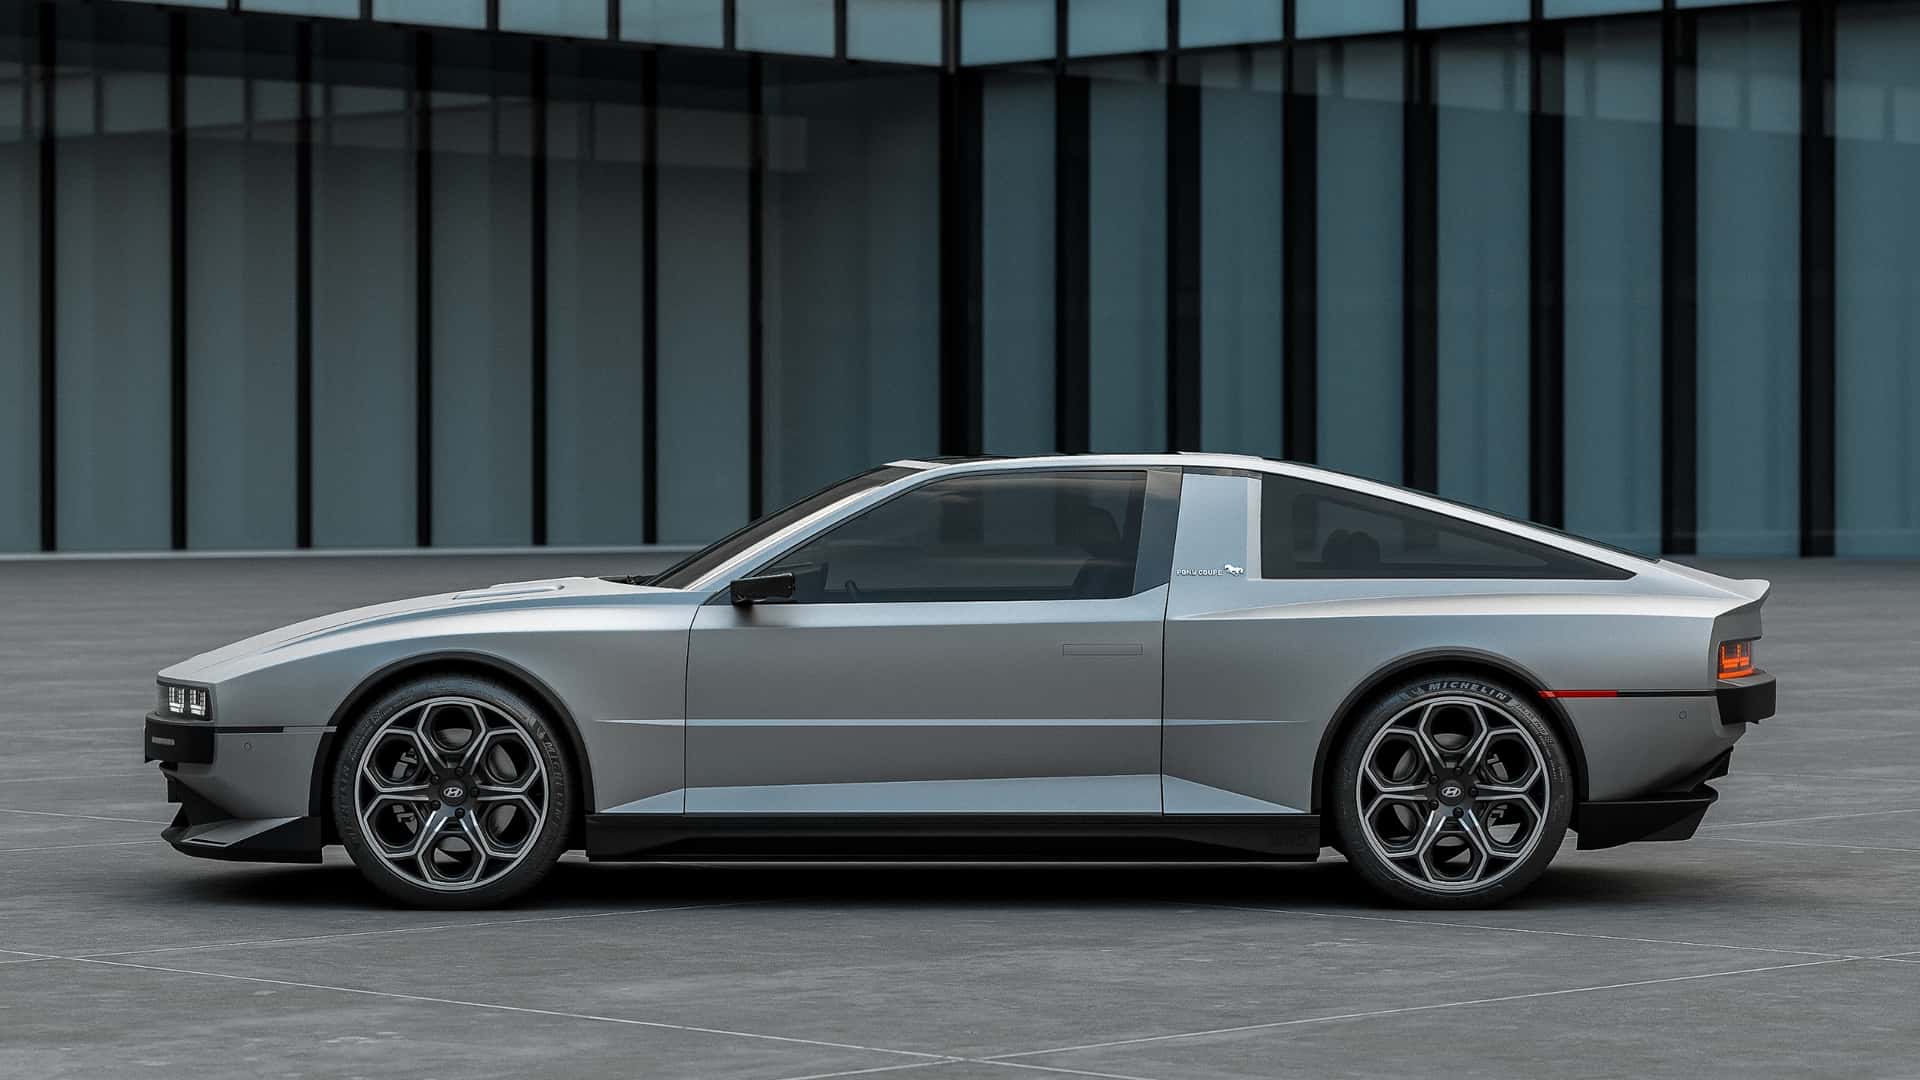 hyundai pony coupe concept rendering 2 - Hyundai Files Trademark Application for "N74" Name, Fuelling Speculation of a New Sports Car